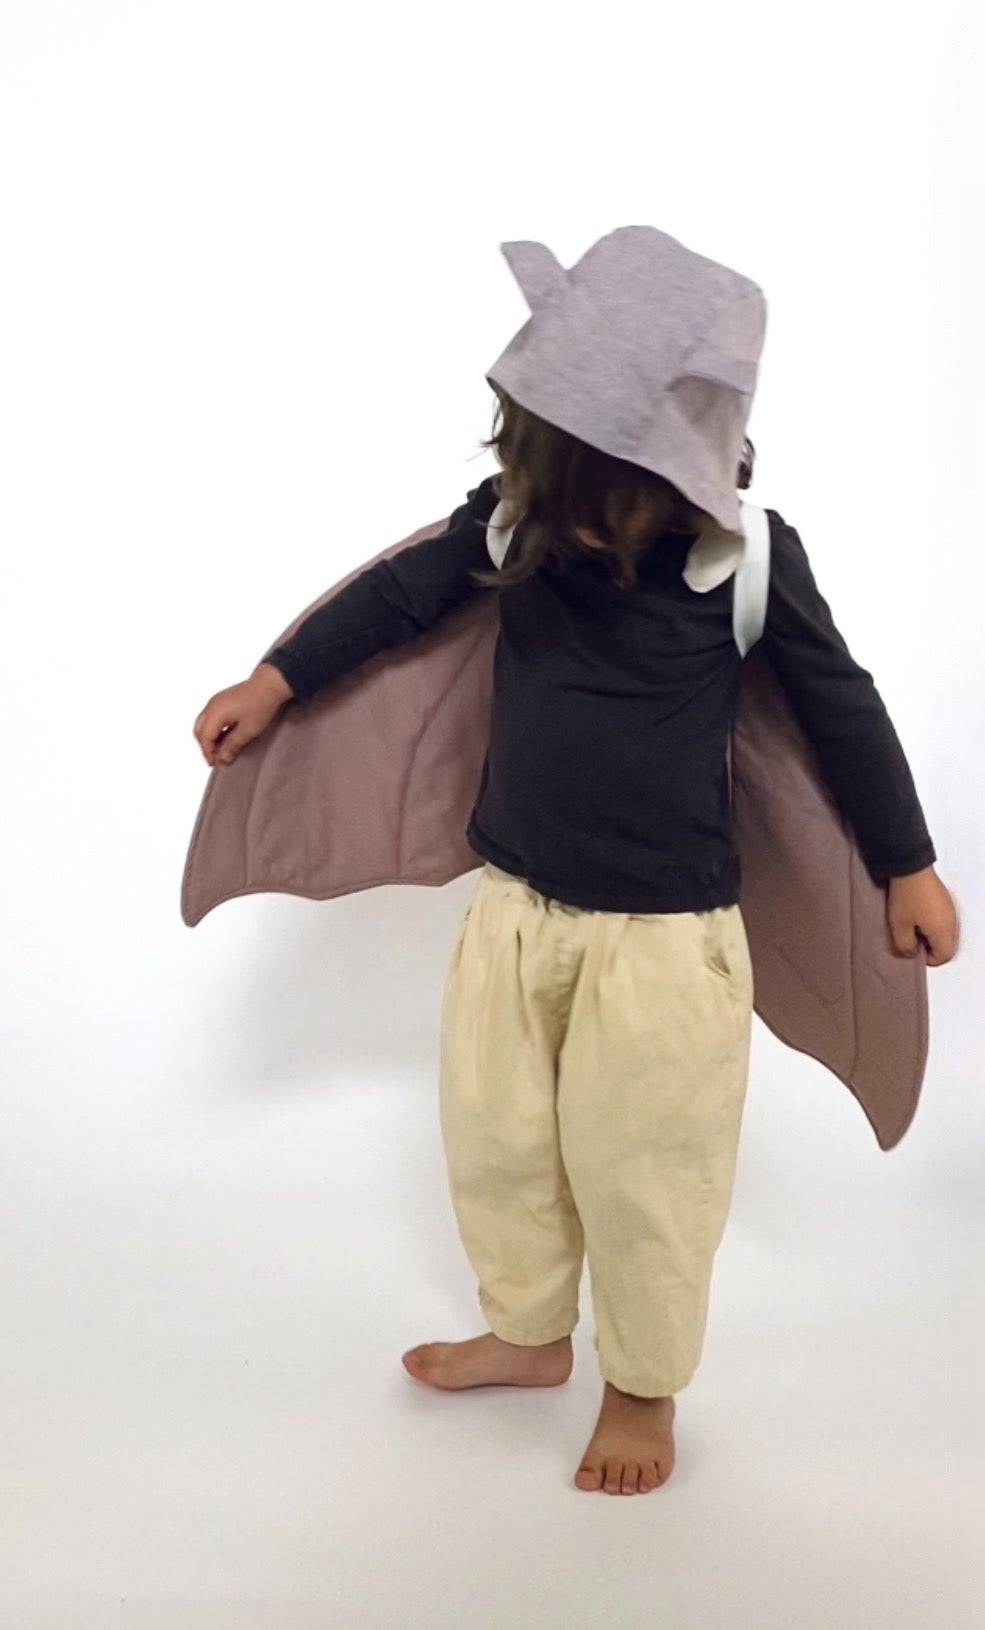 Bat costume wings and ears for kids made in the USA.